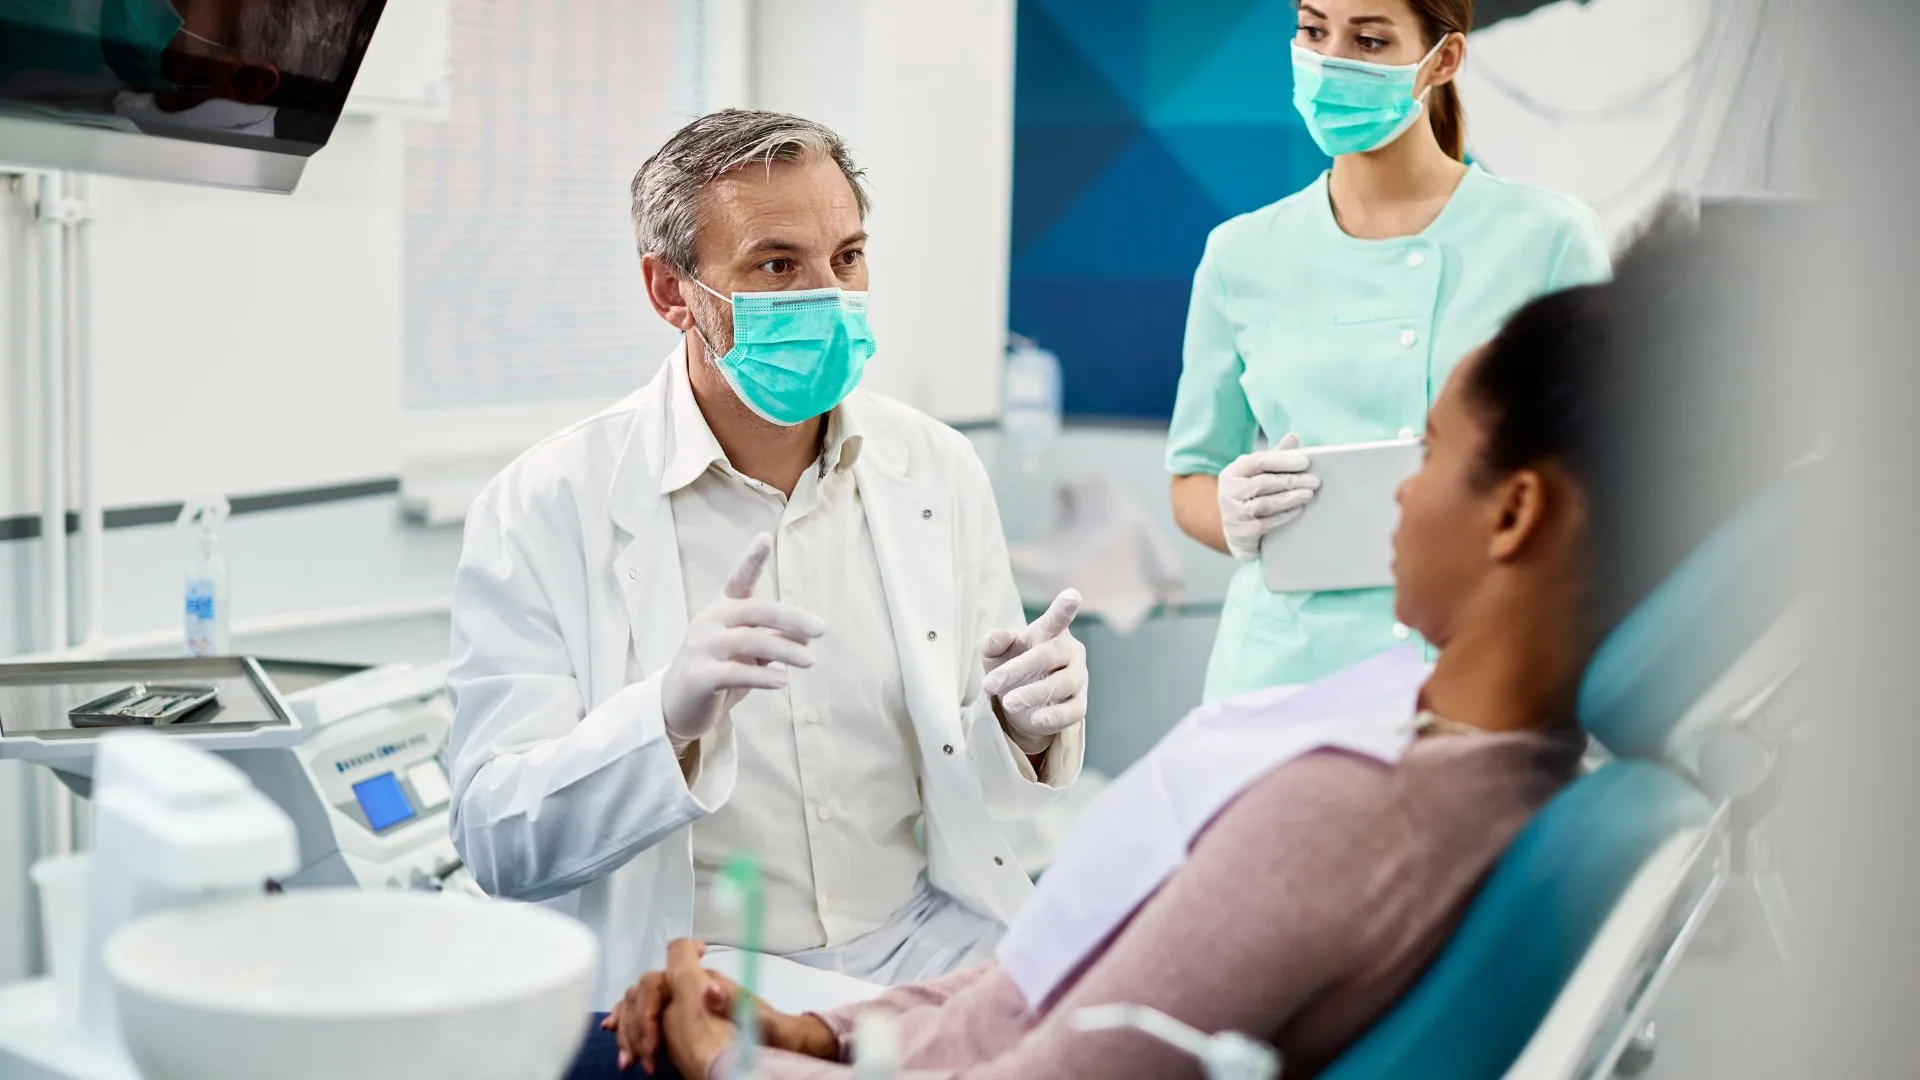 Fluoride Treatment at the Dental Office